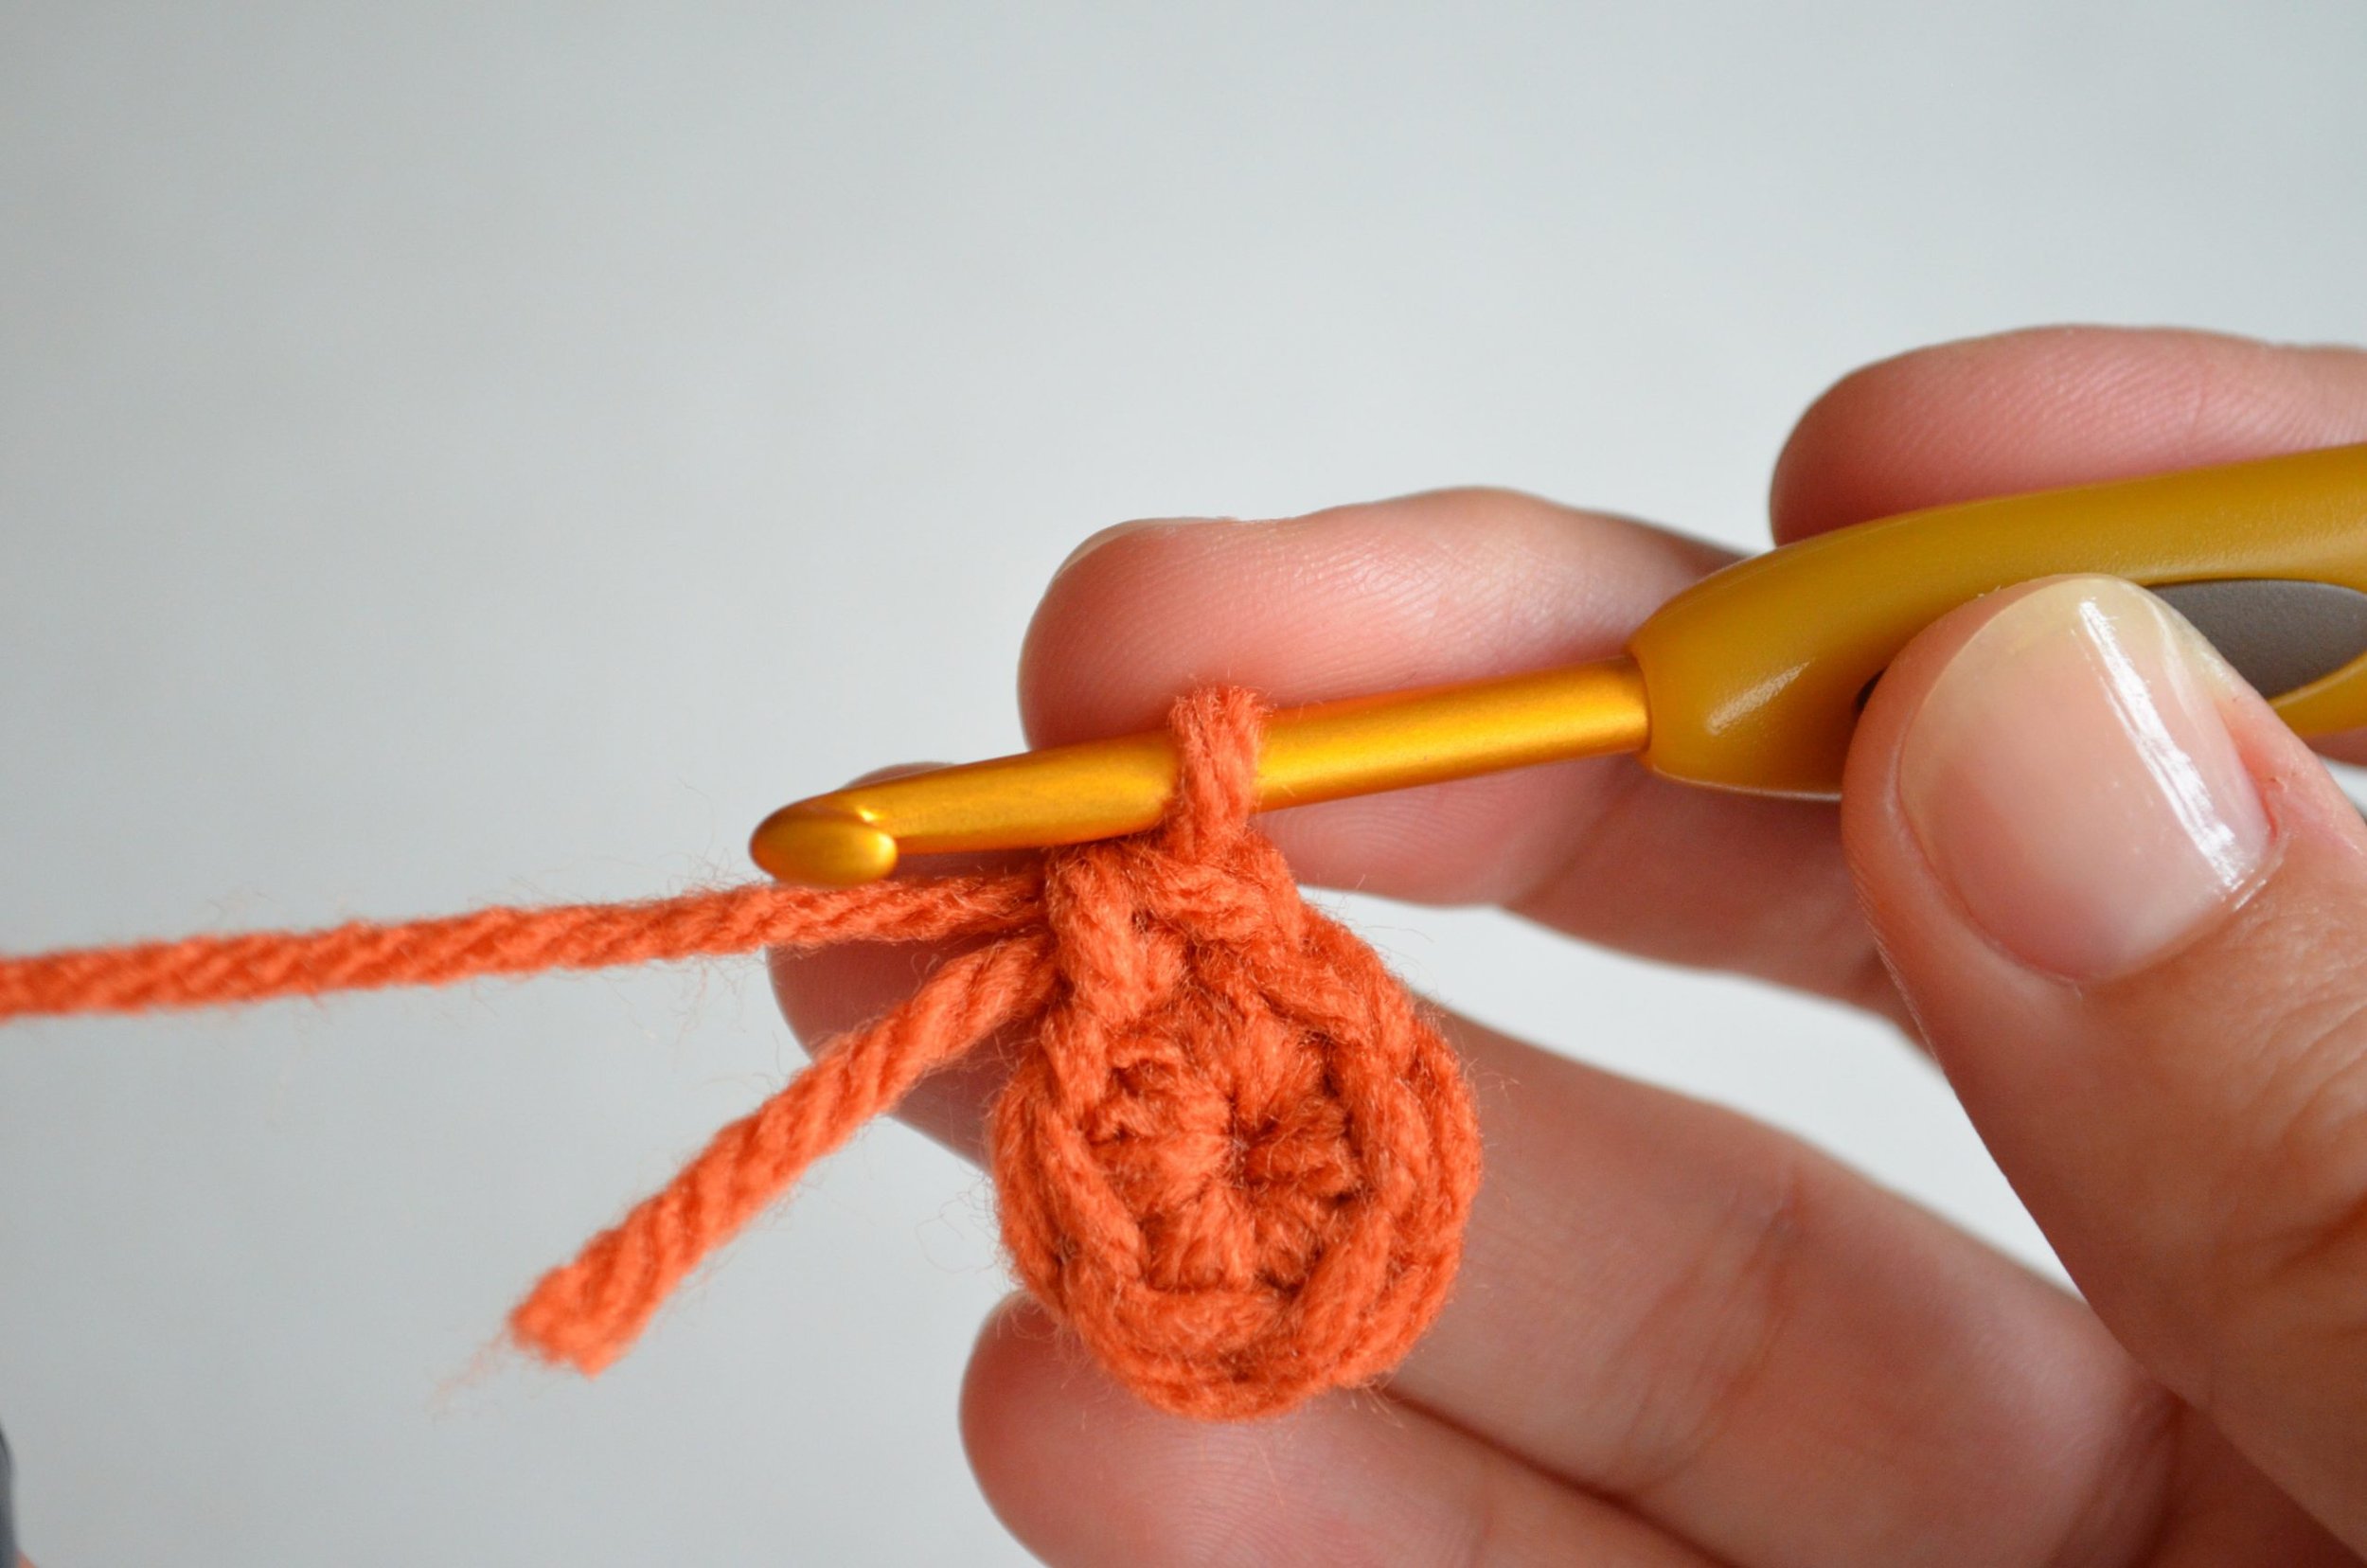 Crochet Basics - How to Work in the Round (Inc) — Pops de Milk - Fun and  Nerdy Crochet Patterns